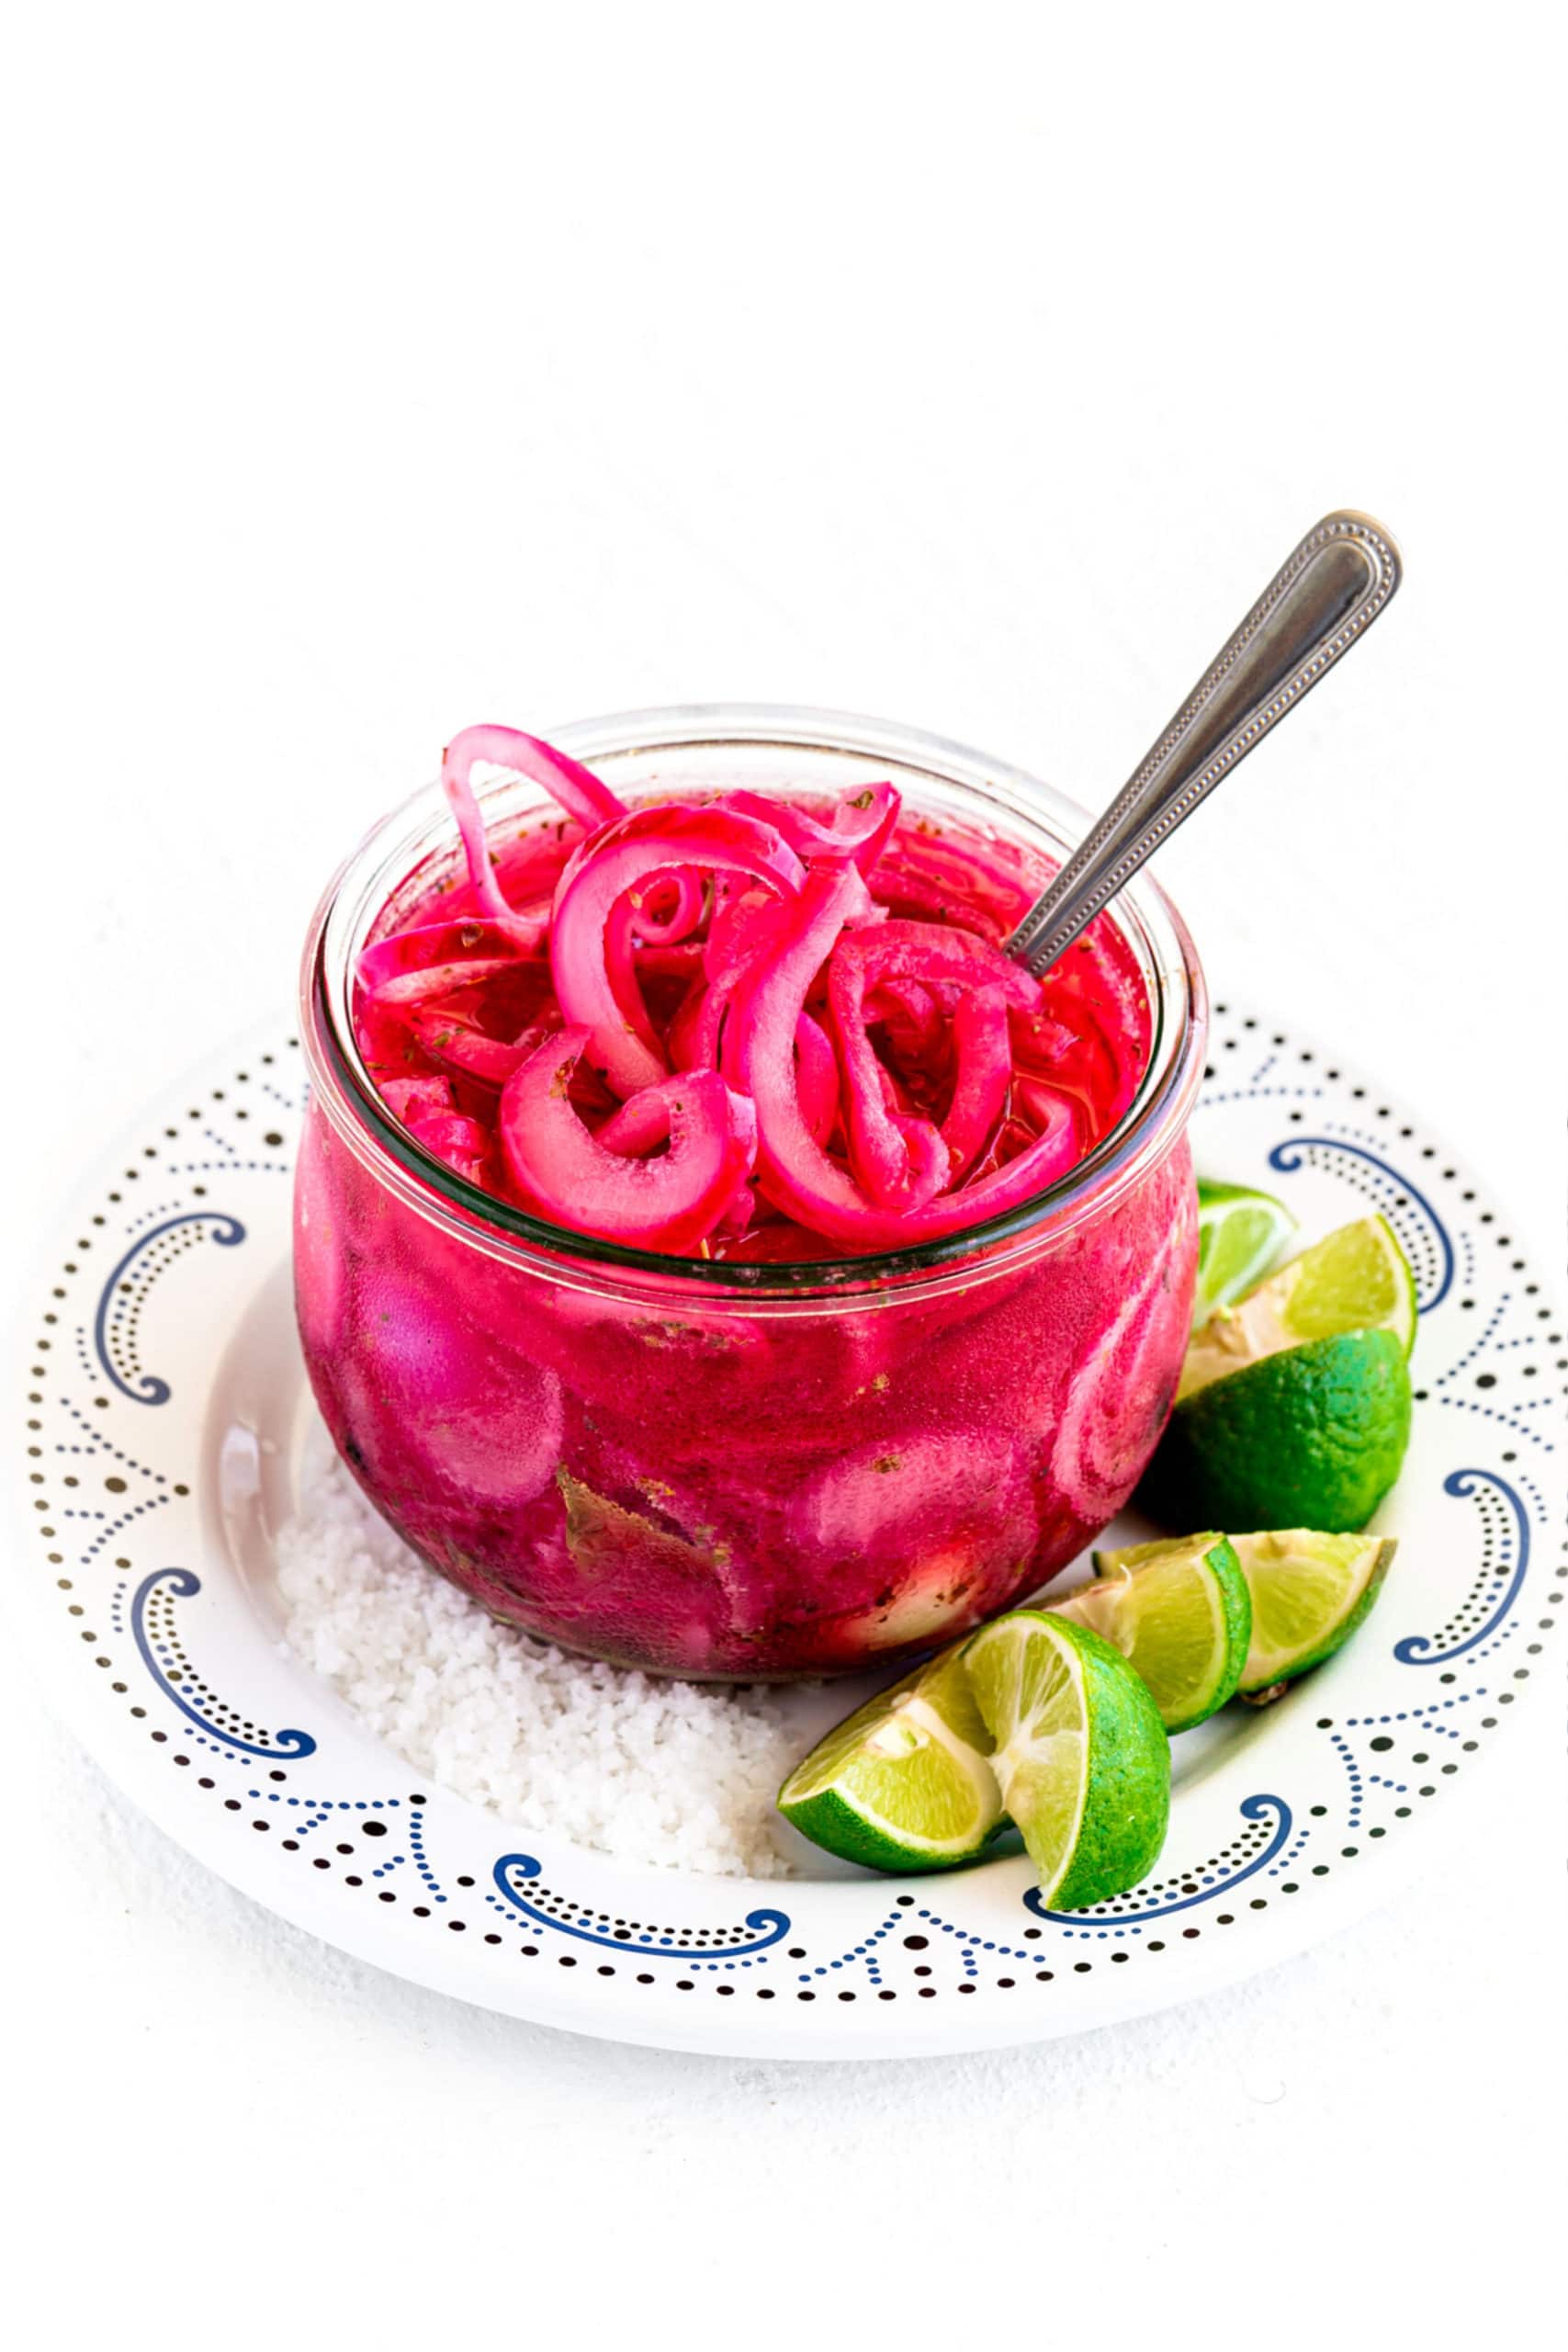 https://www.confettiandbliss.com/wp-content/uploads/2021/04/Quick-Mexican-Pickled-Onions-scaled.jpg